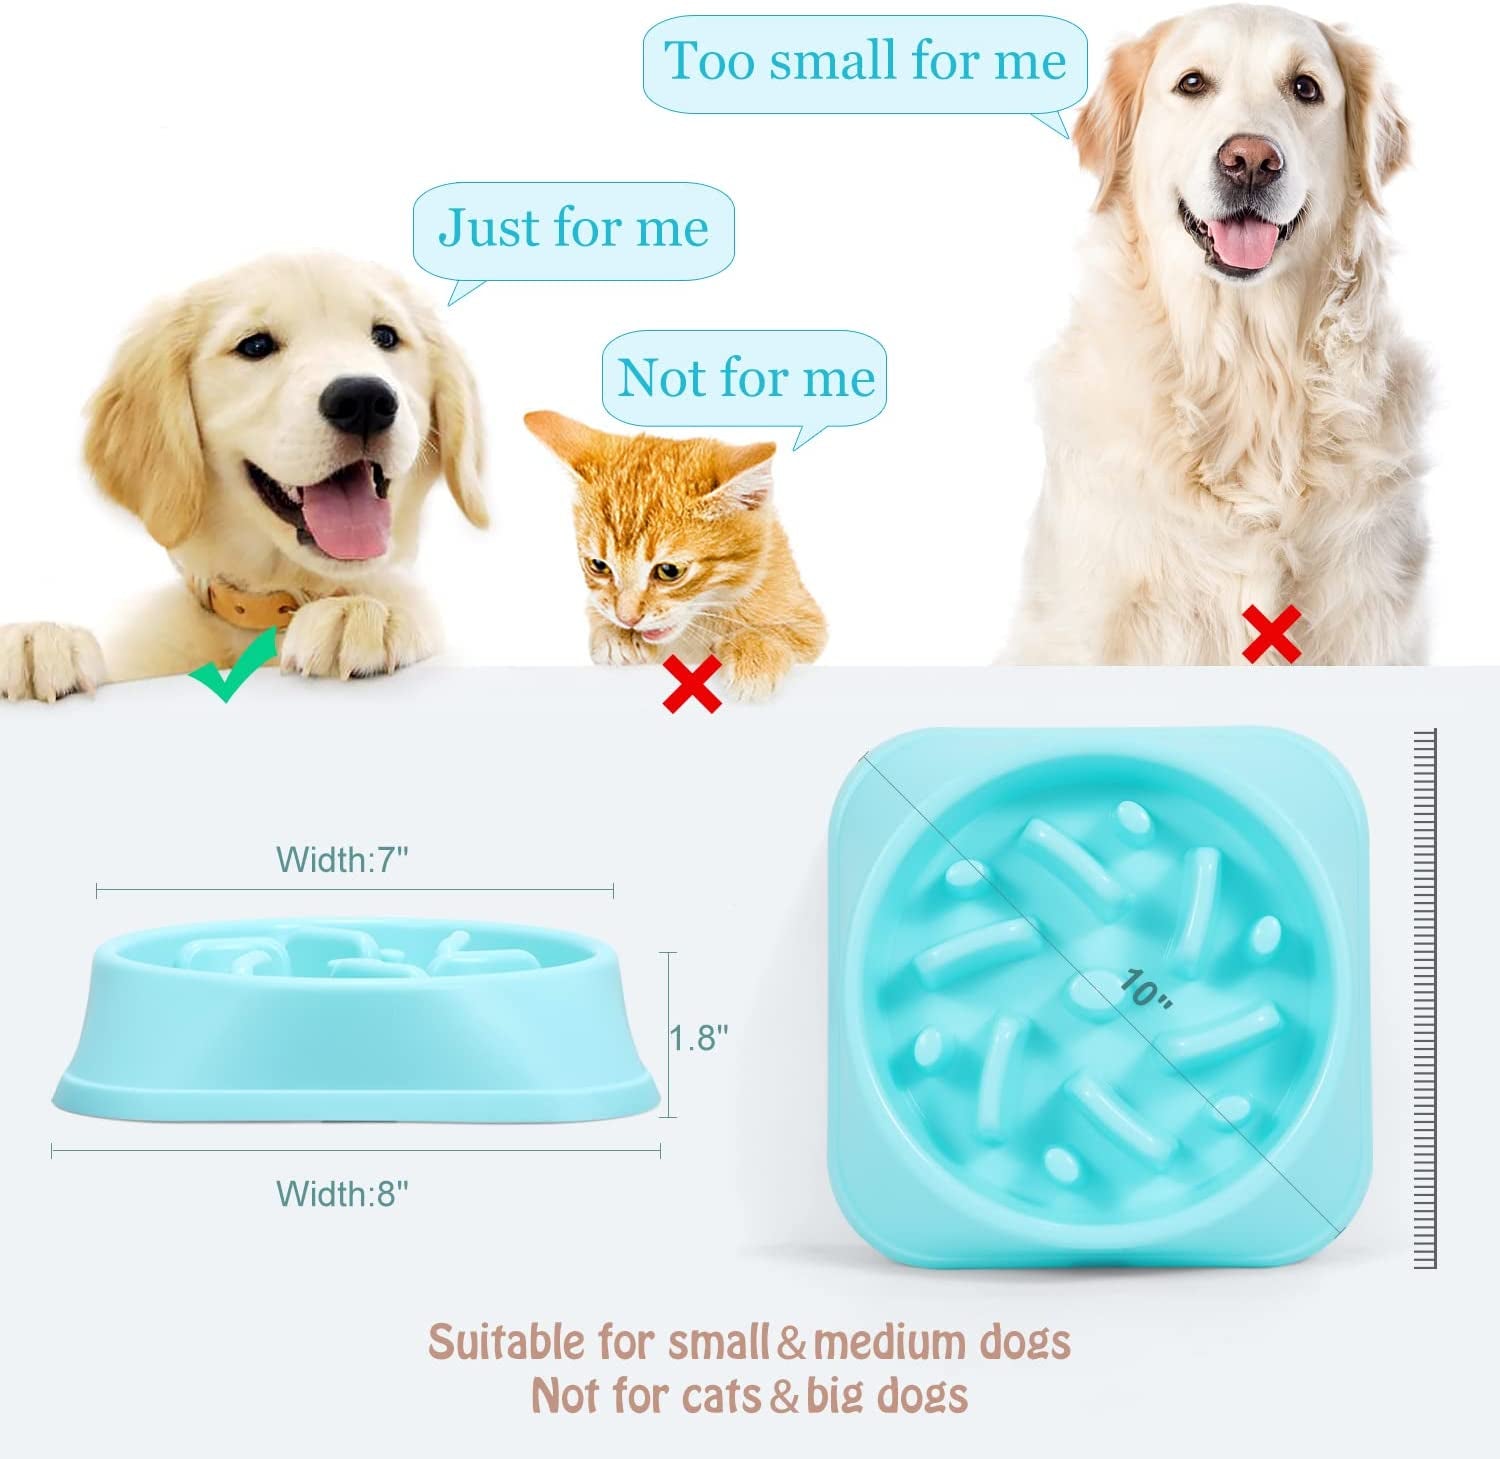 "Ultimate Slow Feeder Bowl for Dogs - Promotes Healthy Eating, Prevents Choking and Bloat, Eco-Friendly and Durable Design!"